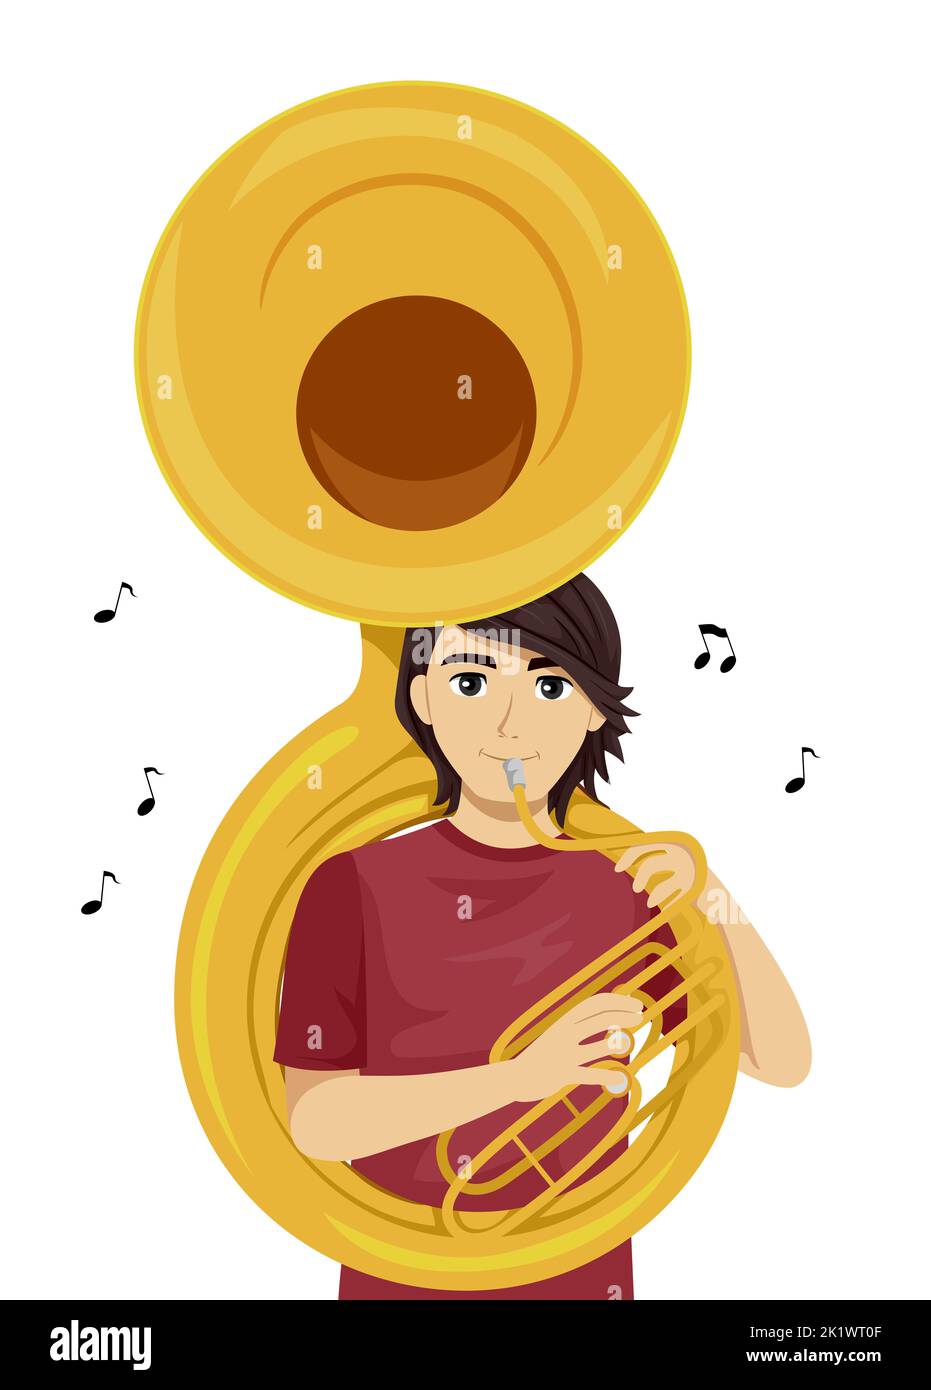 Illustration of Teen Boy Holding and Playing Sousaphone Instrument with Musical Notes Floating Around Stock Photo